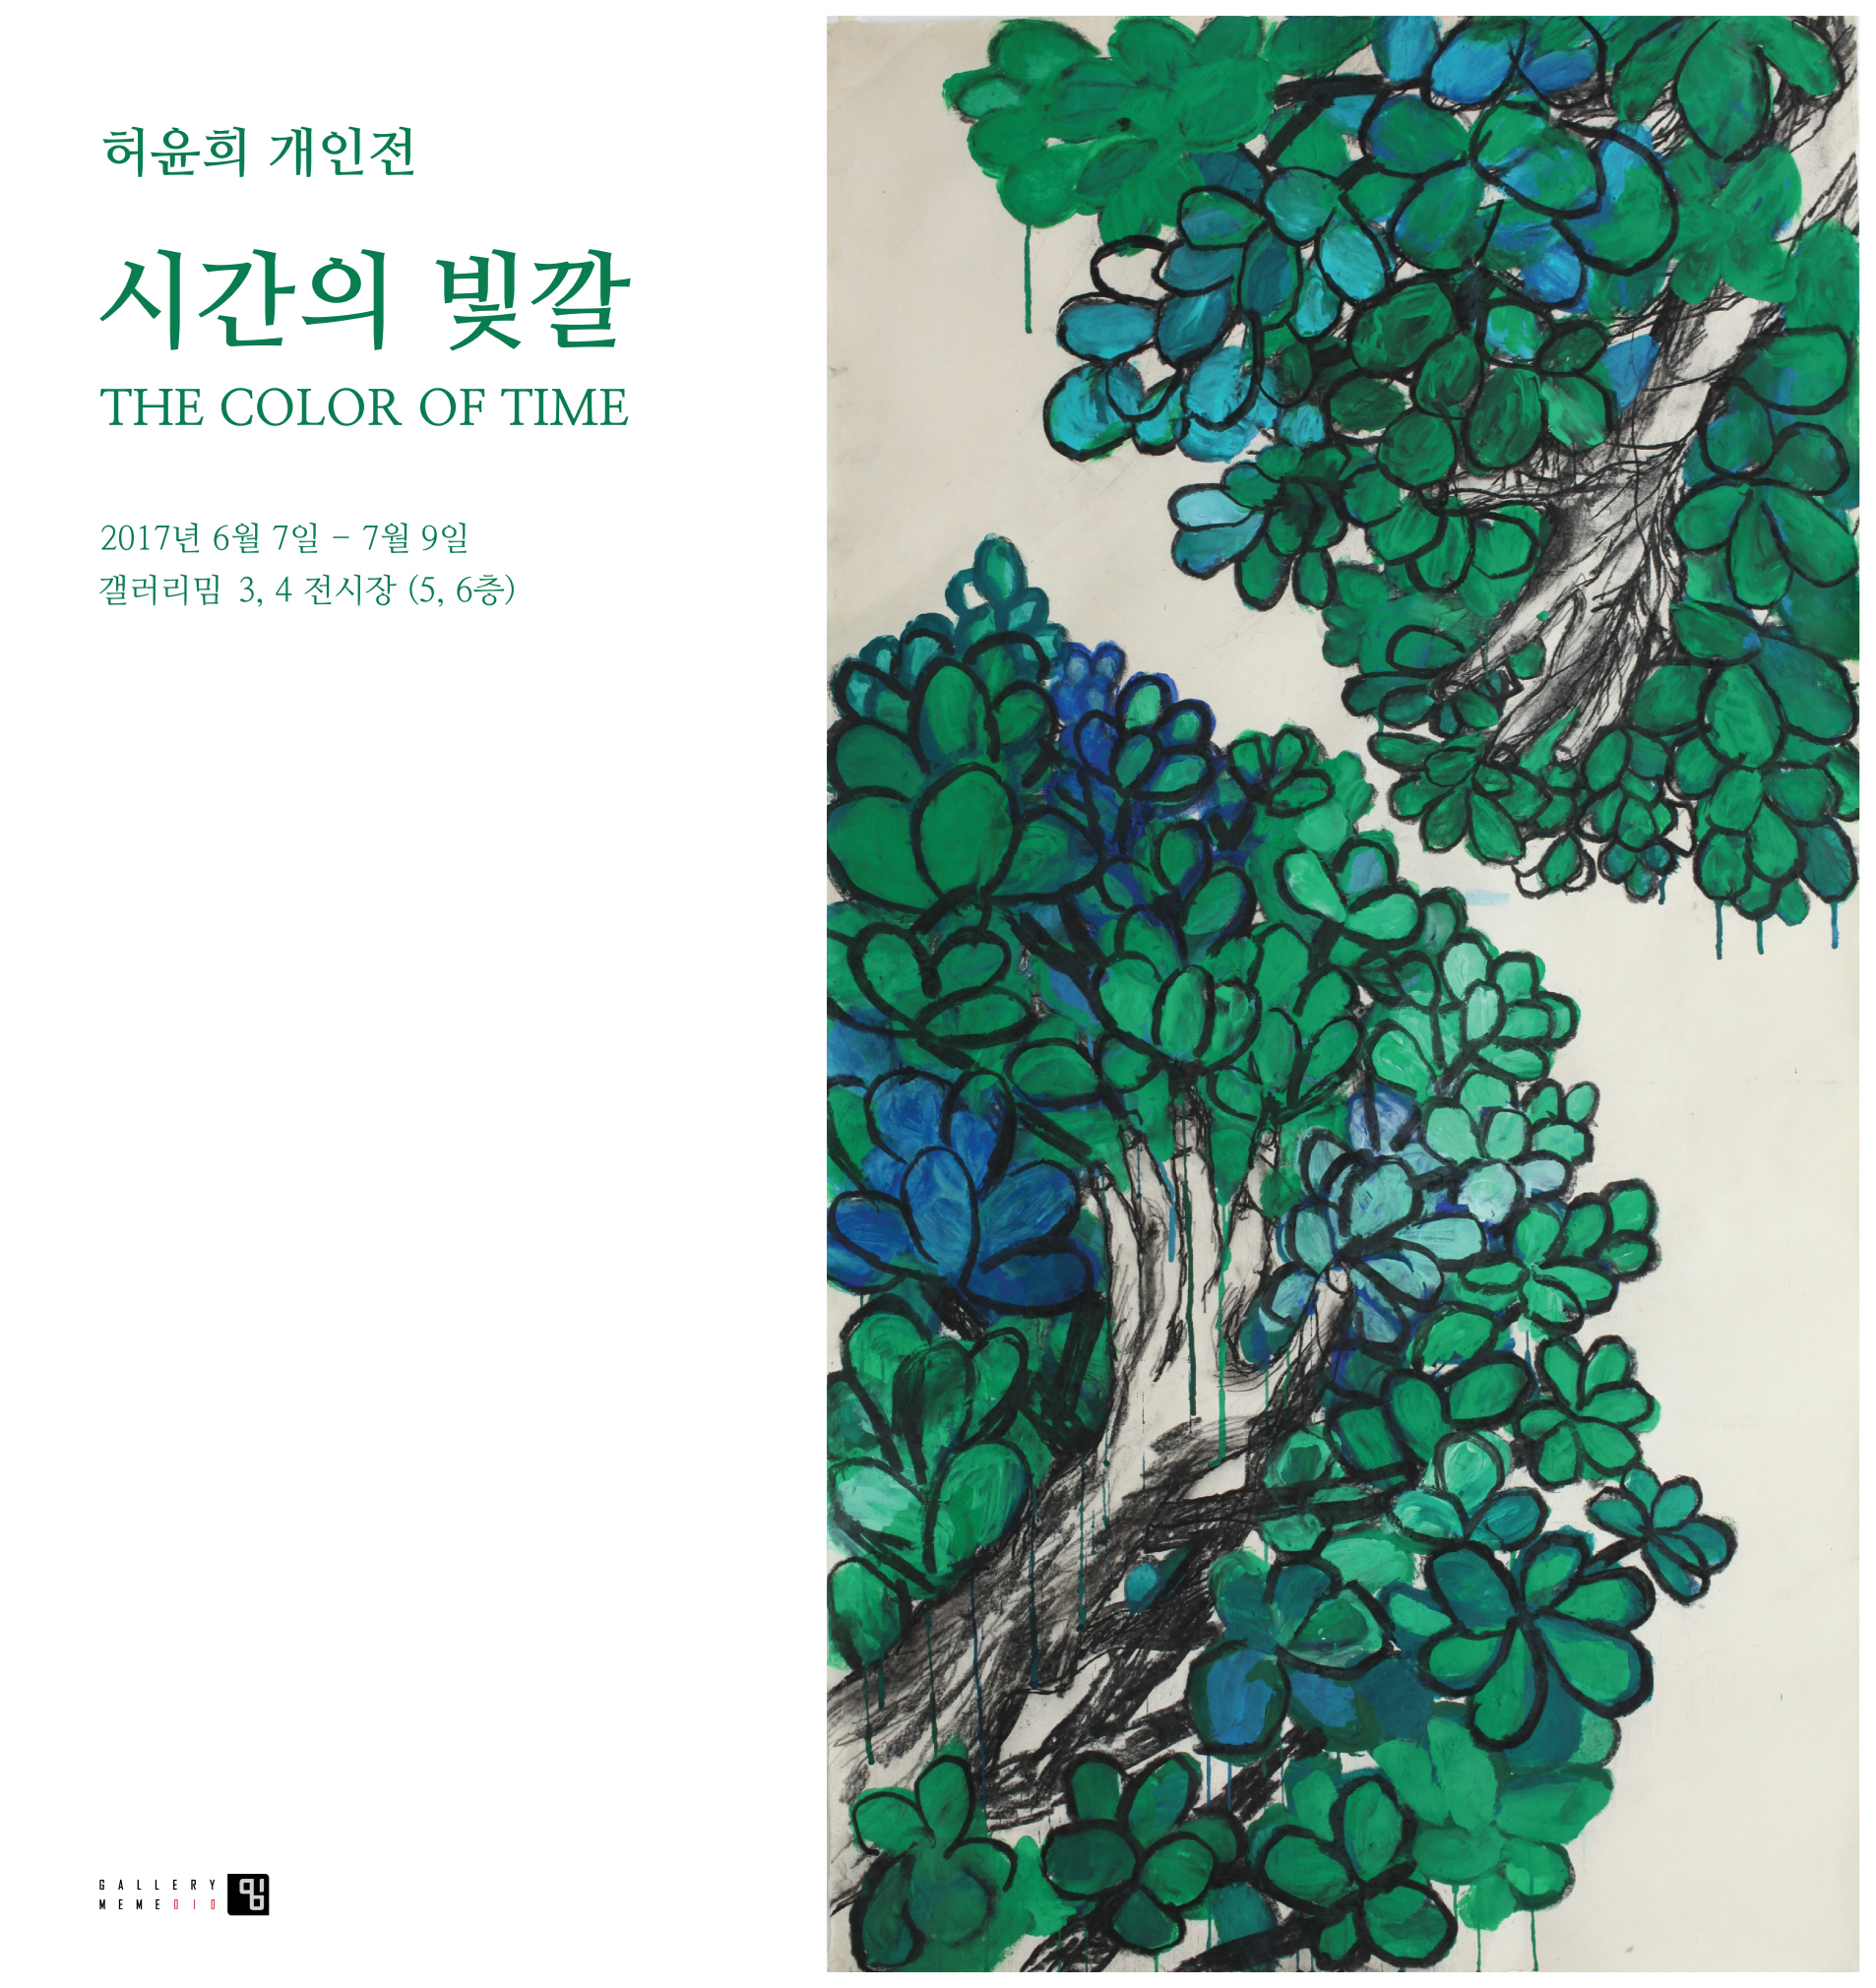 The Color of Time 시간의 빛깔